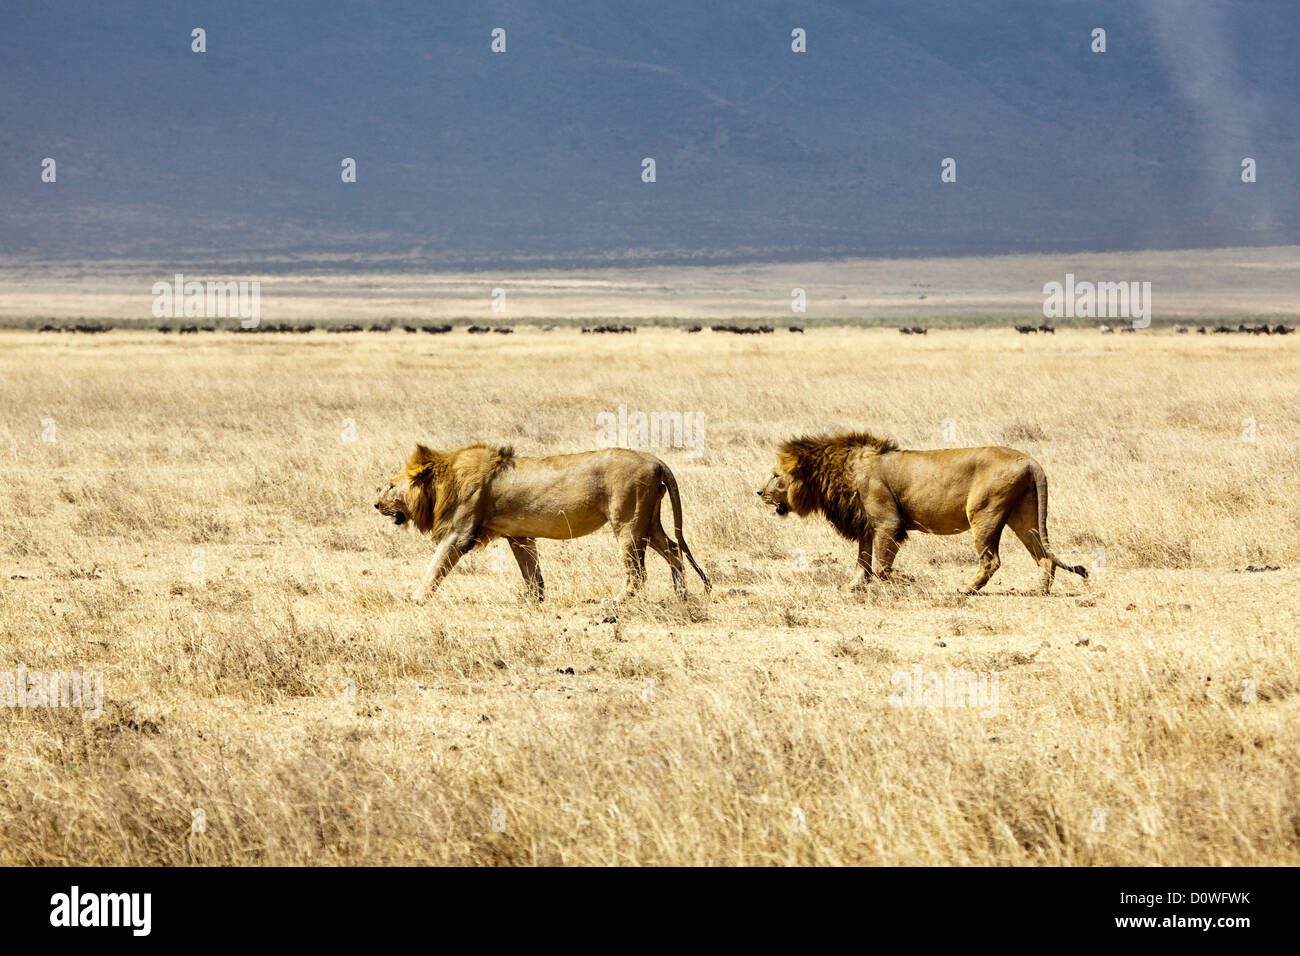 Two male Lions in Ngorongoro Crater;Safari;wildlife;World Heritage Site by UNESCO in Tanzania;East Africa;Africa Stock Photo